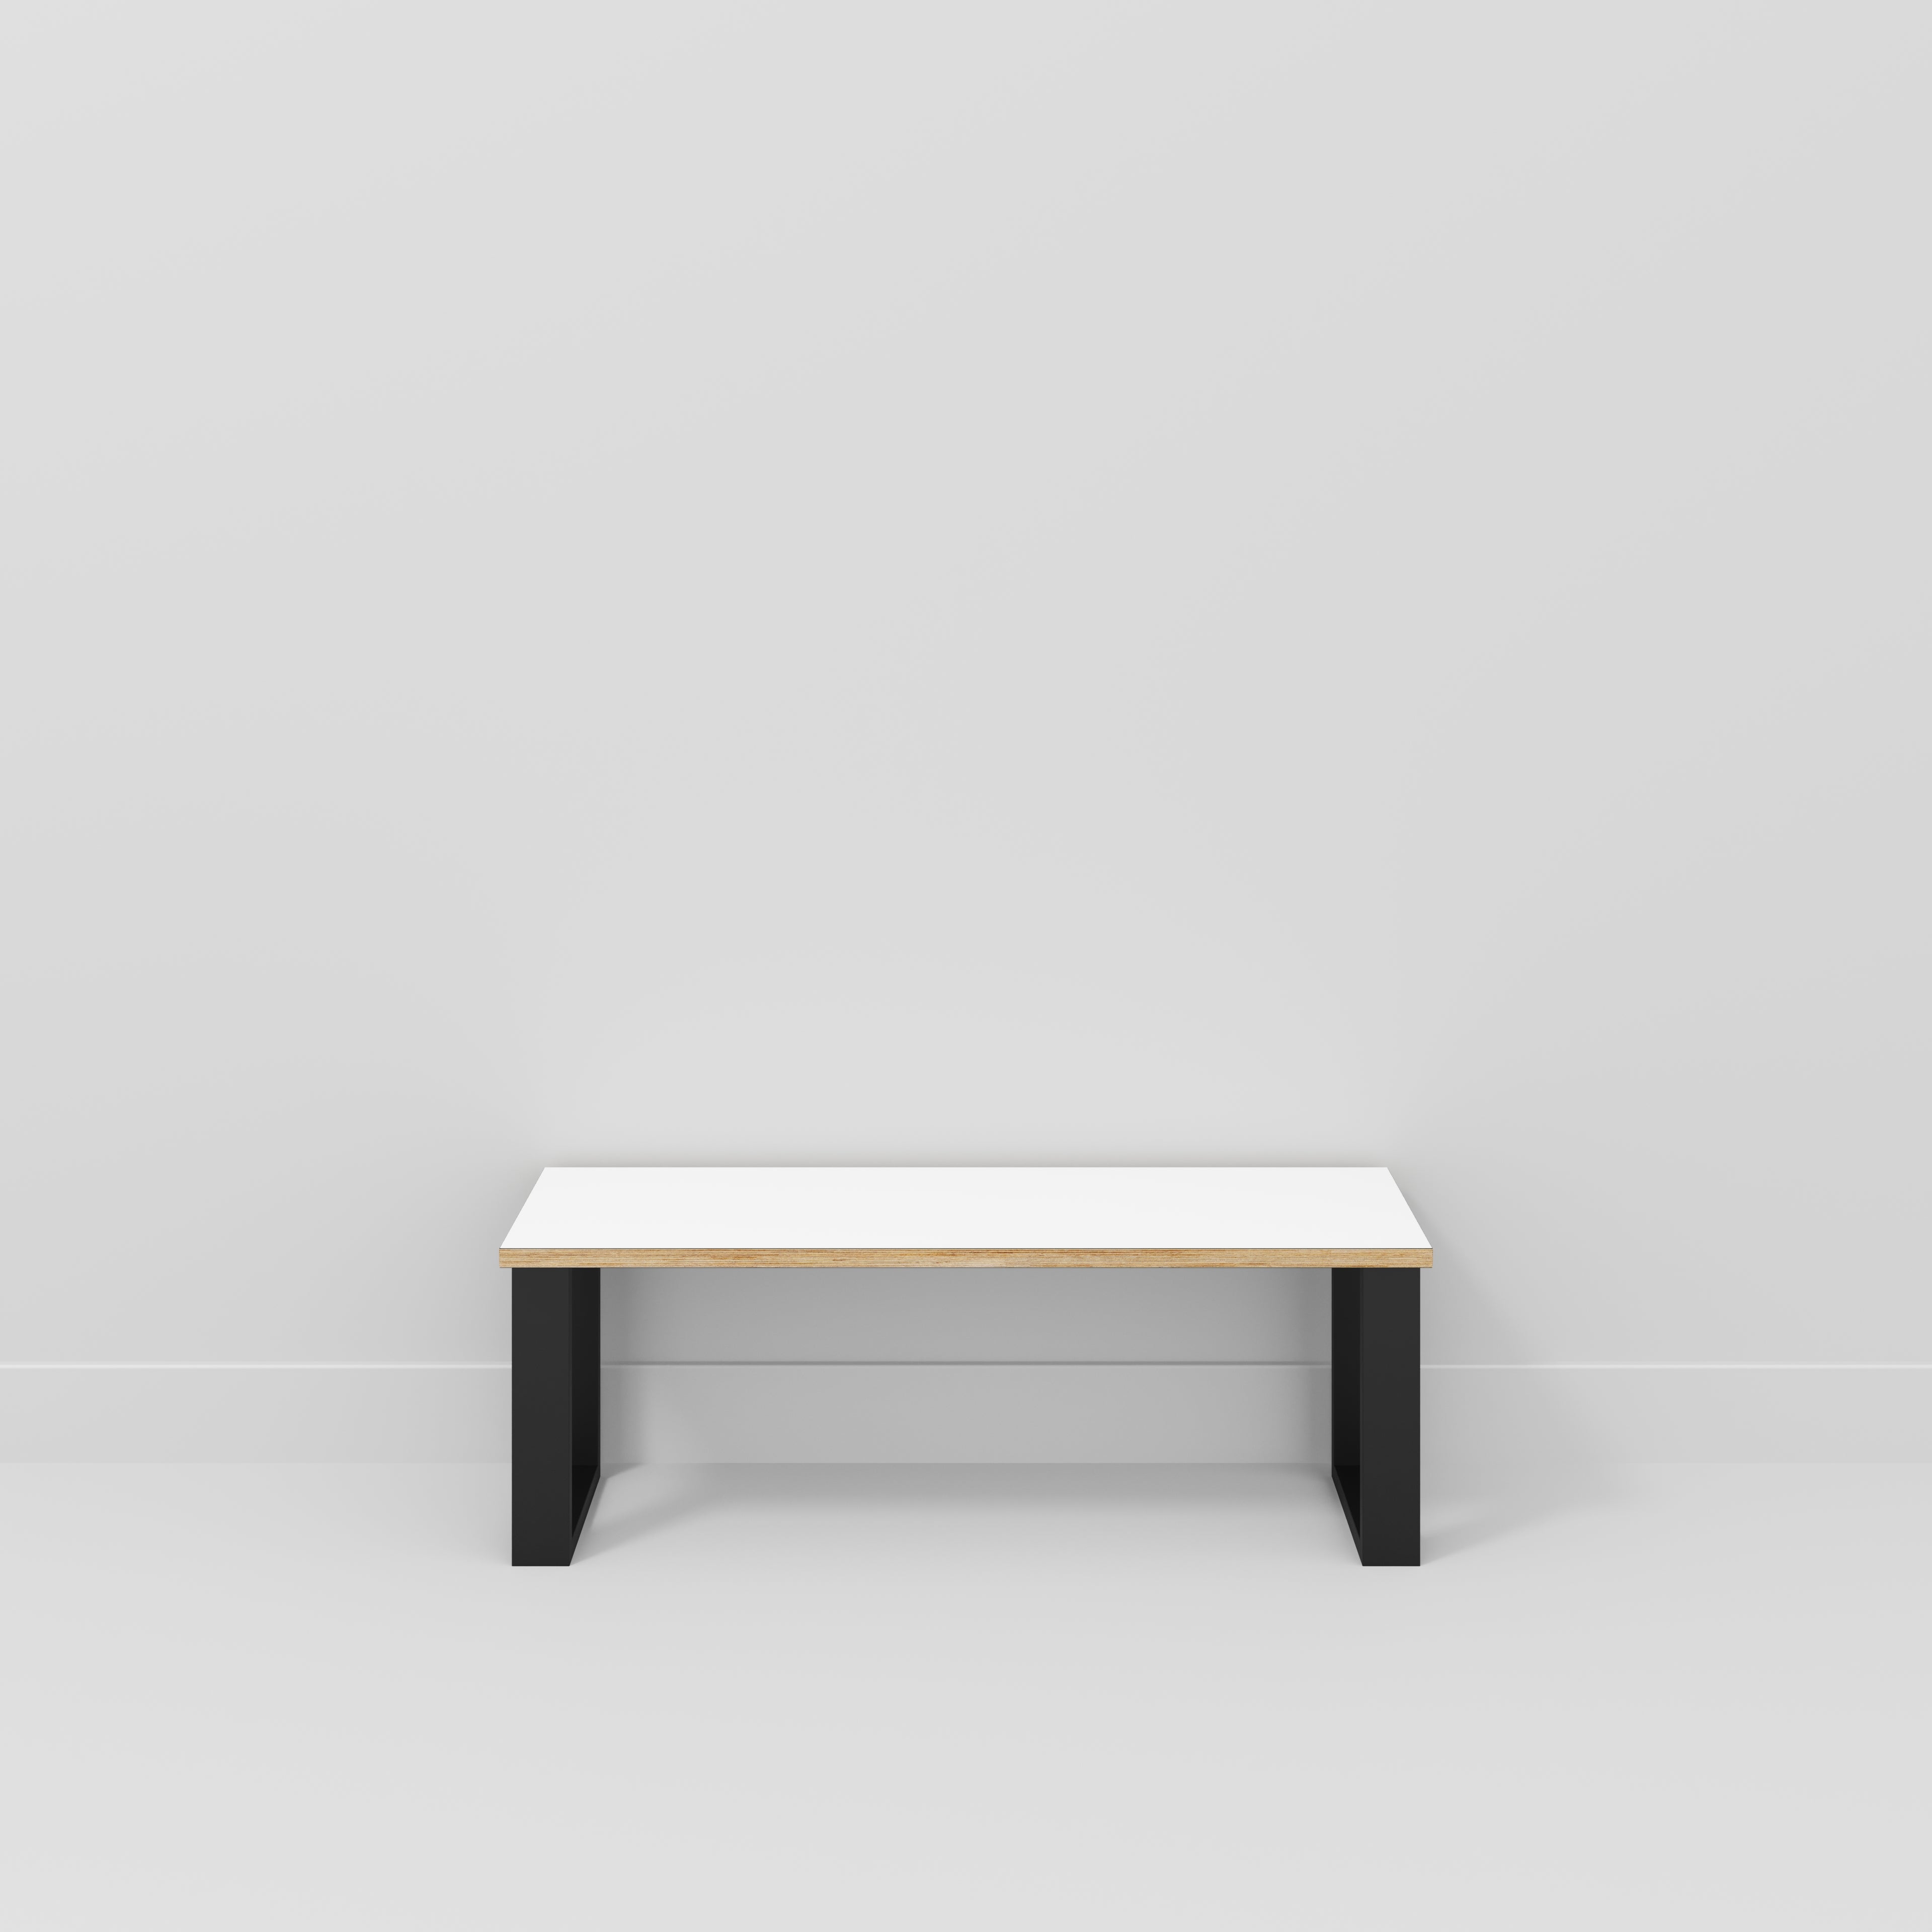 Bench Seat with Black Industrial Legs - Formica White - 1200(w) x 400(d)